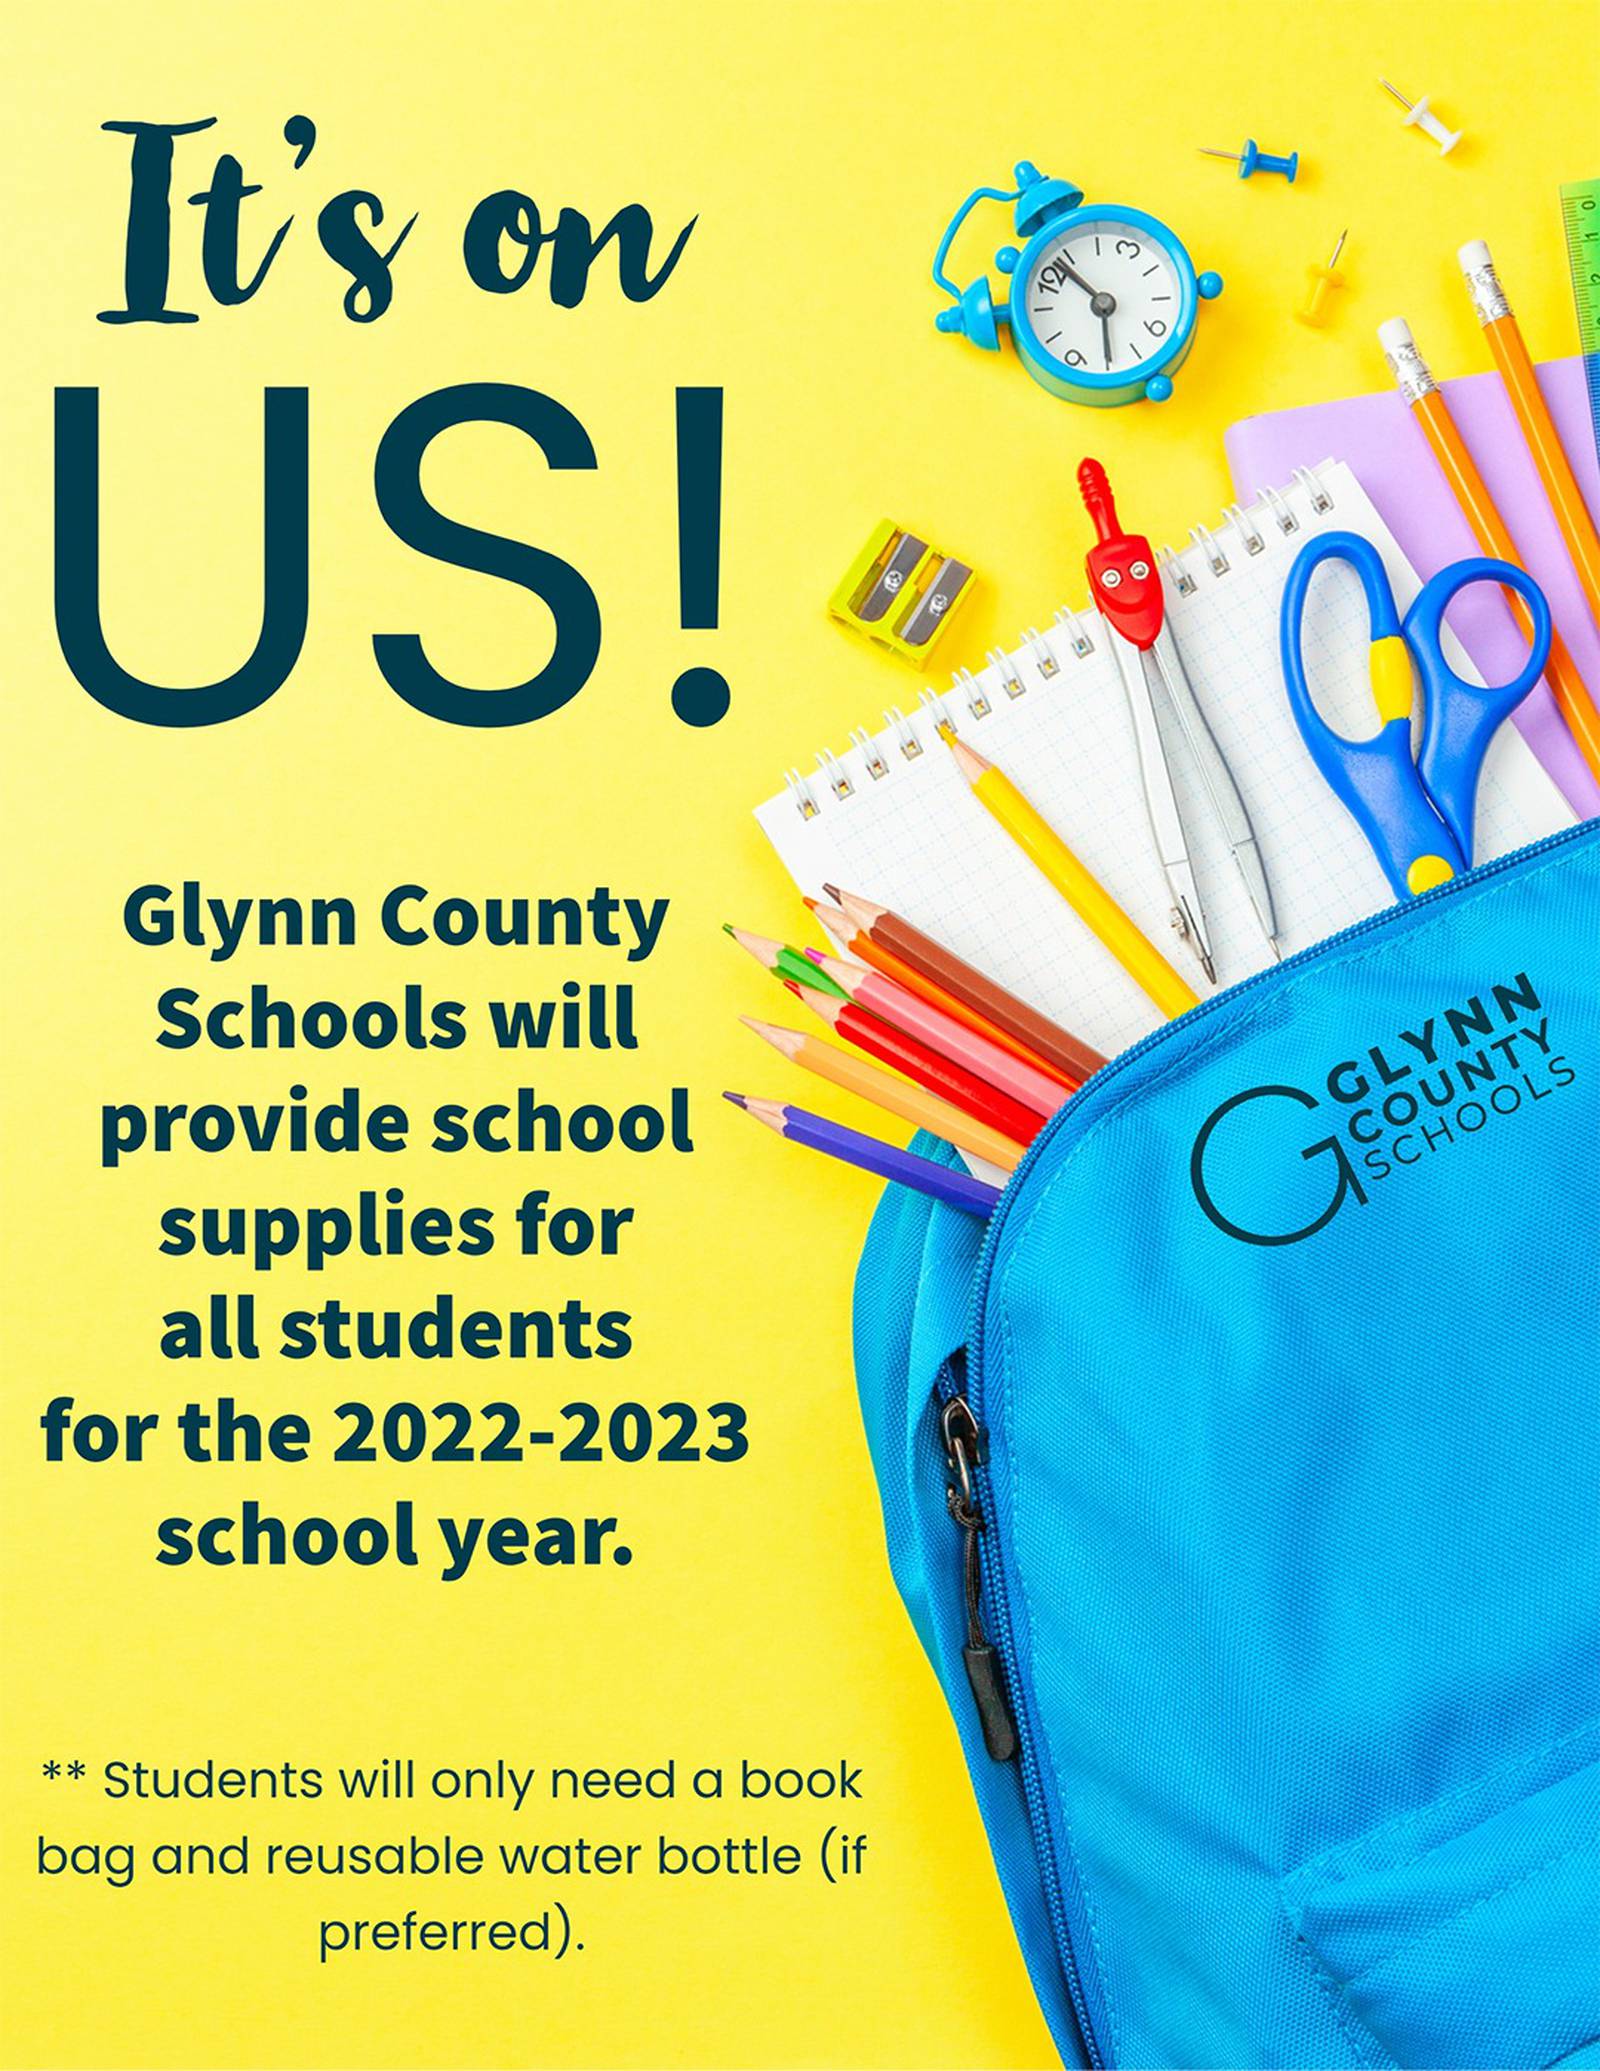 glynn-county-schools-providing-supplies-for-students-in-2022-2023